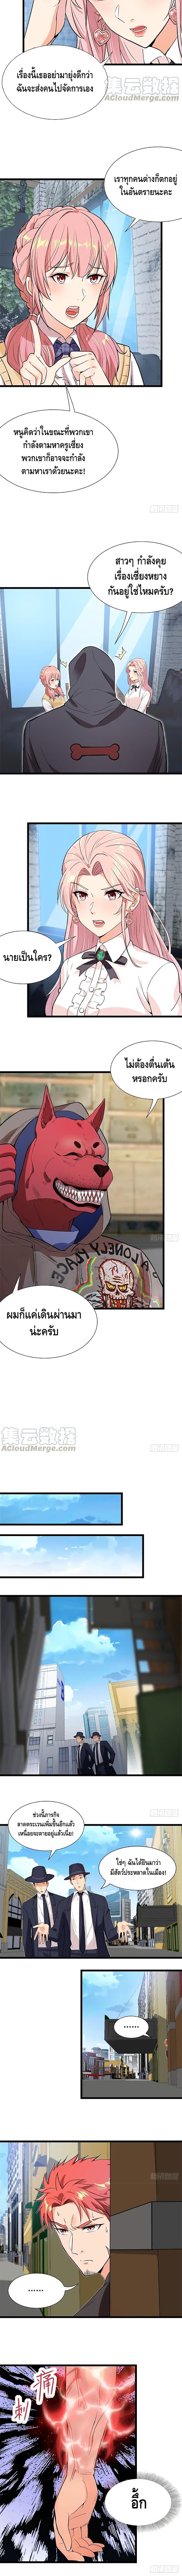 The God Demon King in The City - หน้า 6